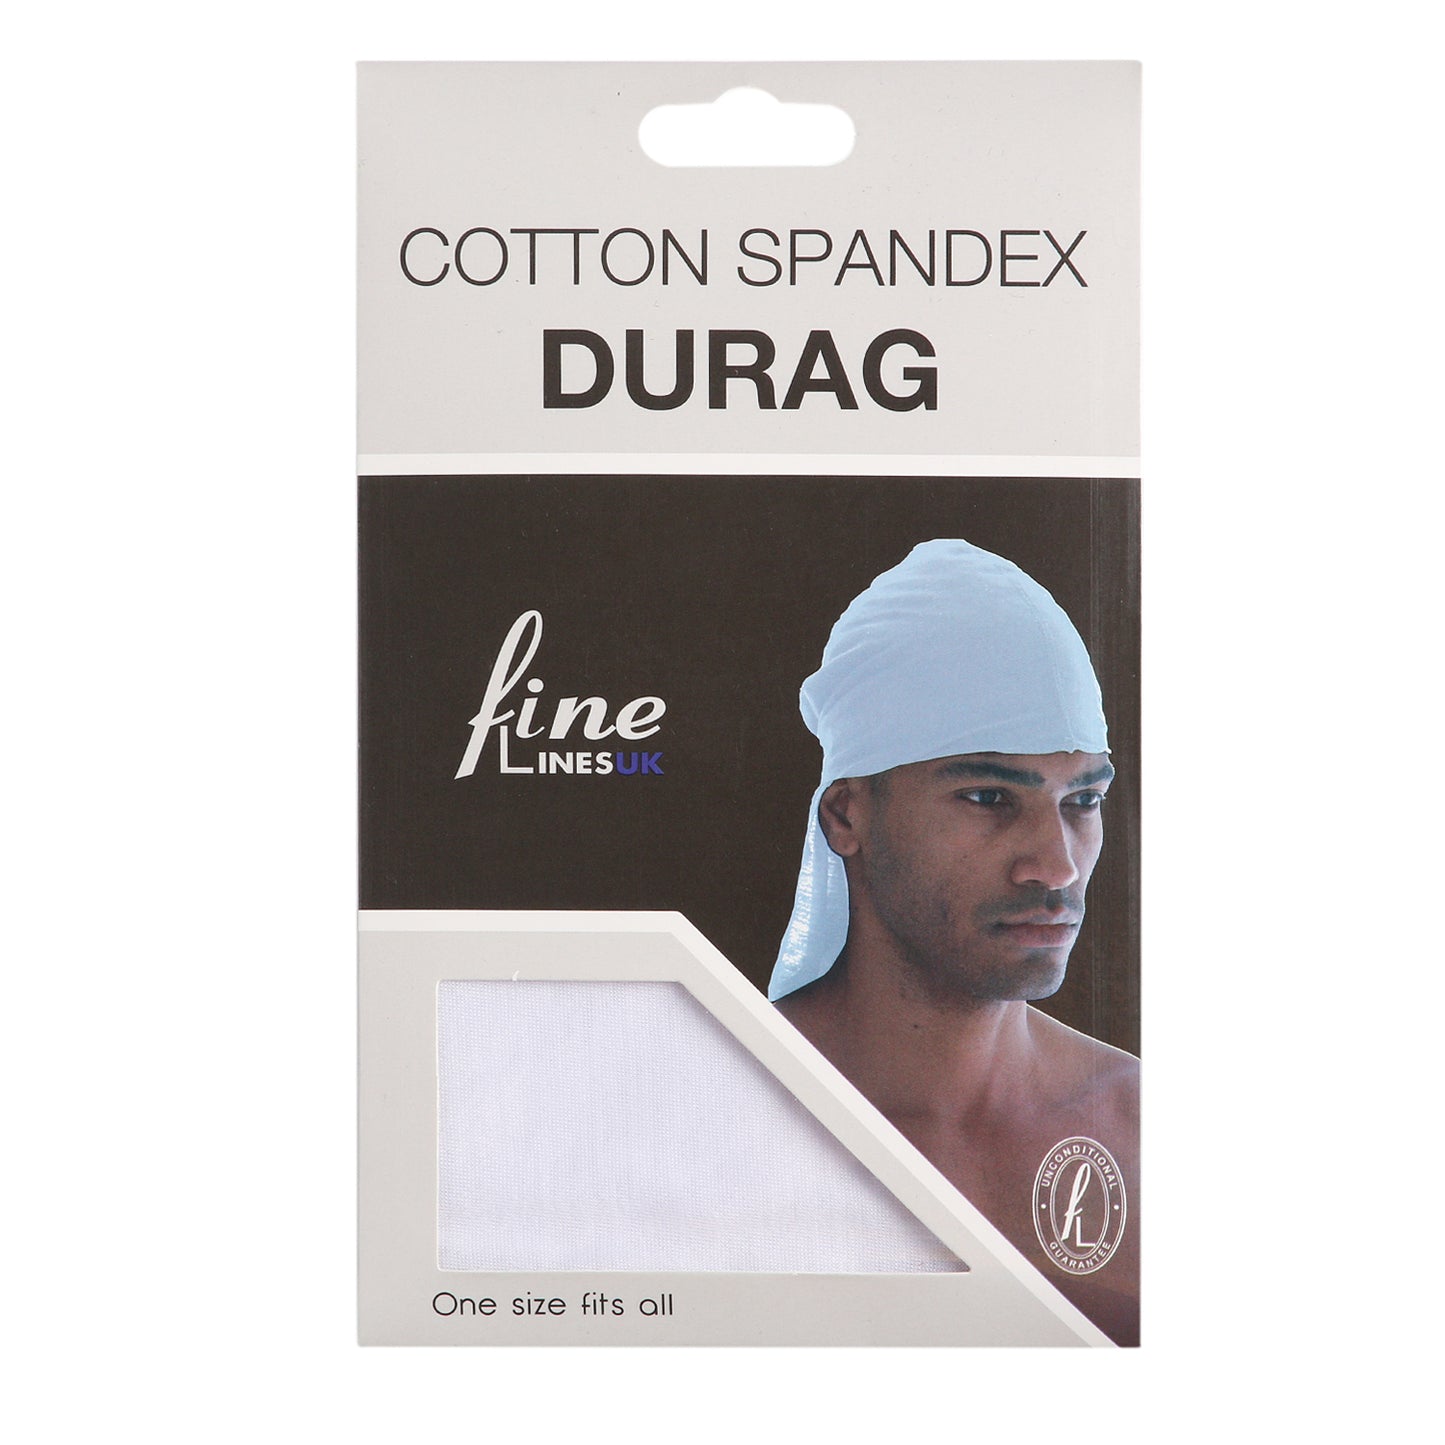 Experience comfort and style with our Cotton Spandex Durag. Made from breathable materials, this durag provides a secure fit and is perfect for maintaining waves or curls.